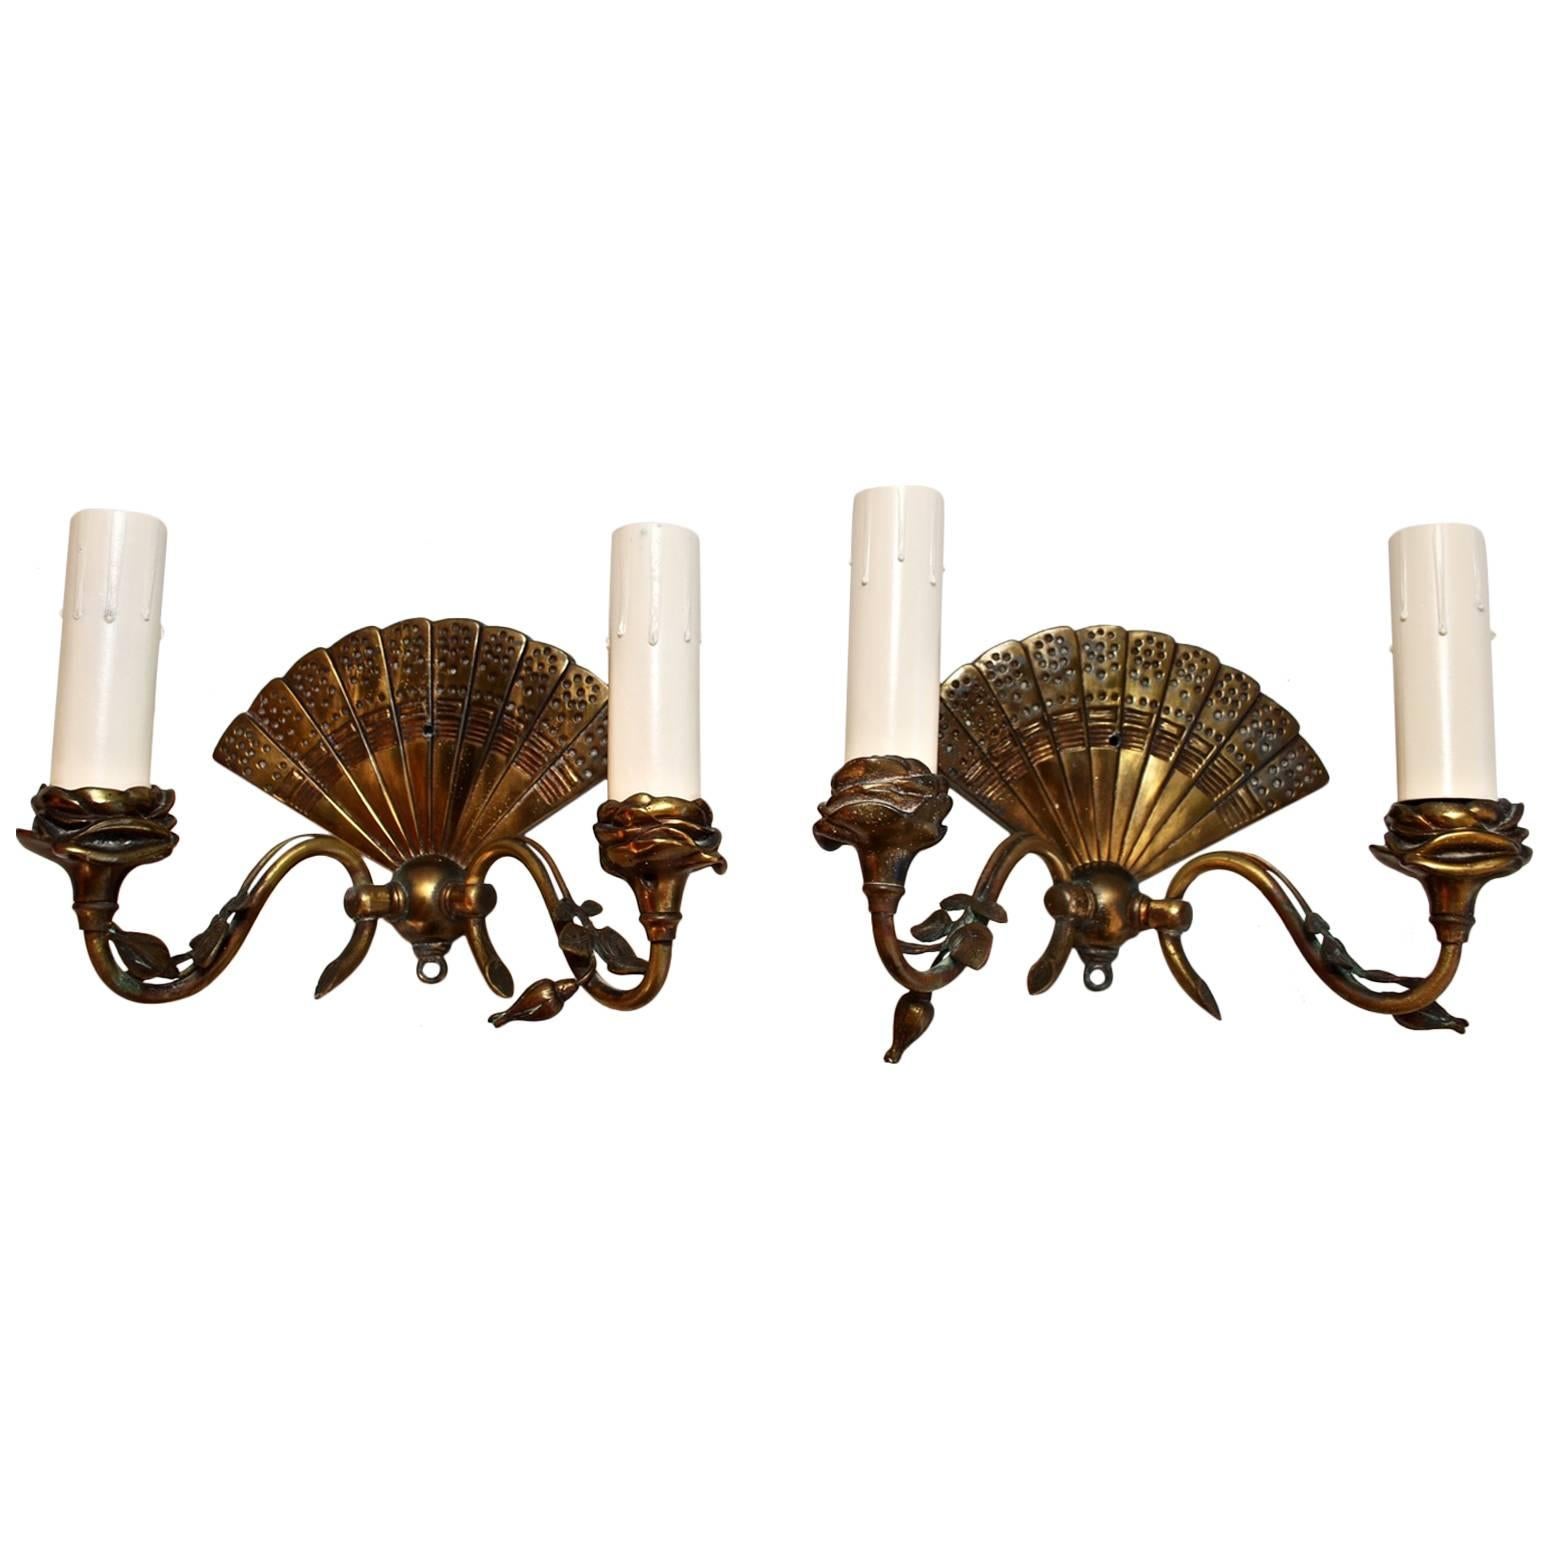 Beautiful and Elegant Pair of Flower and Fans Sconces